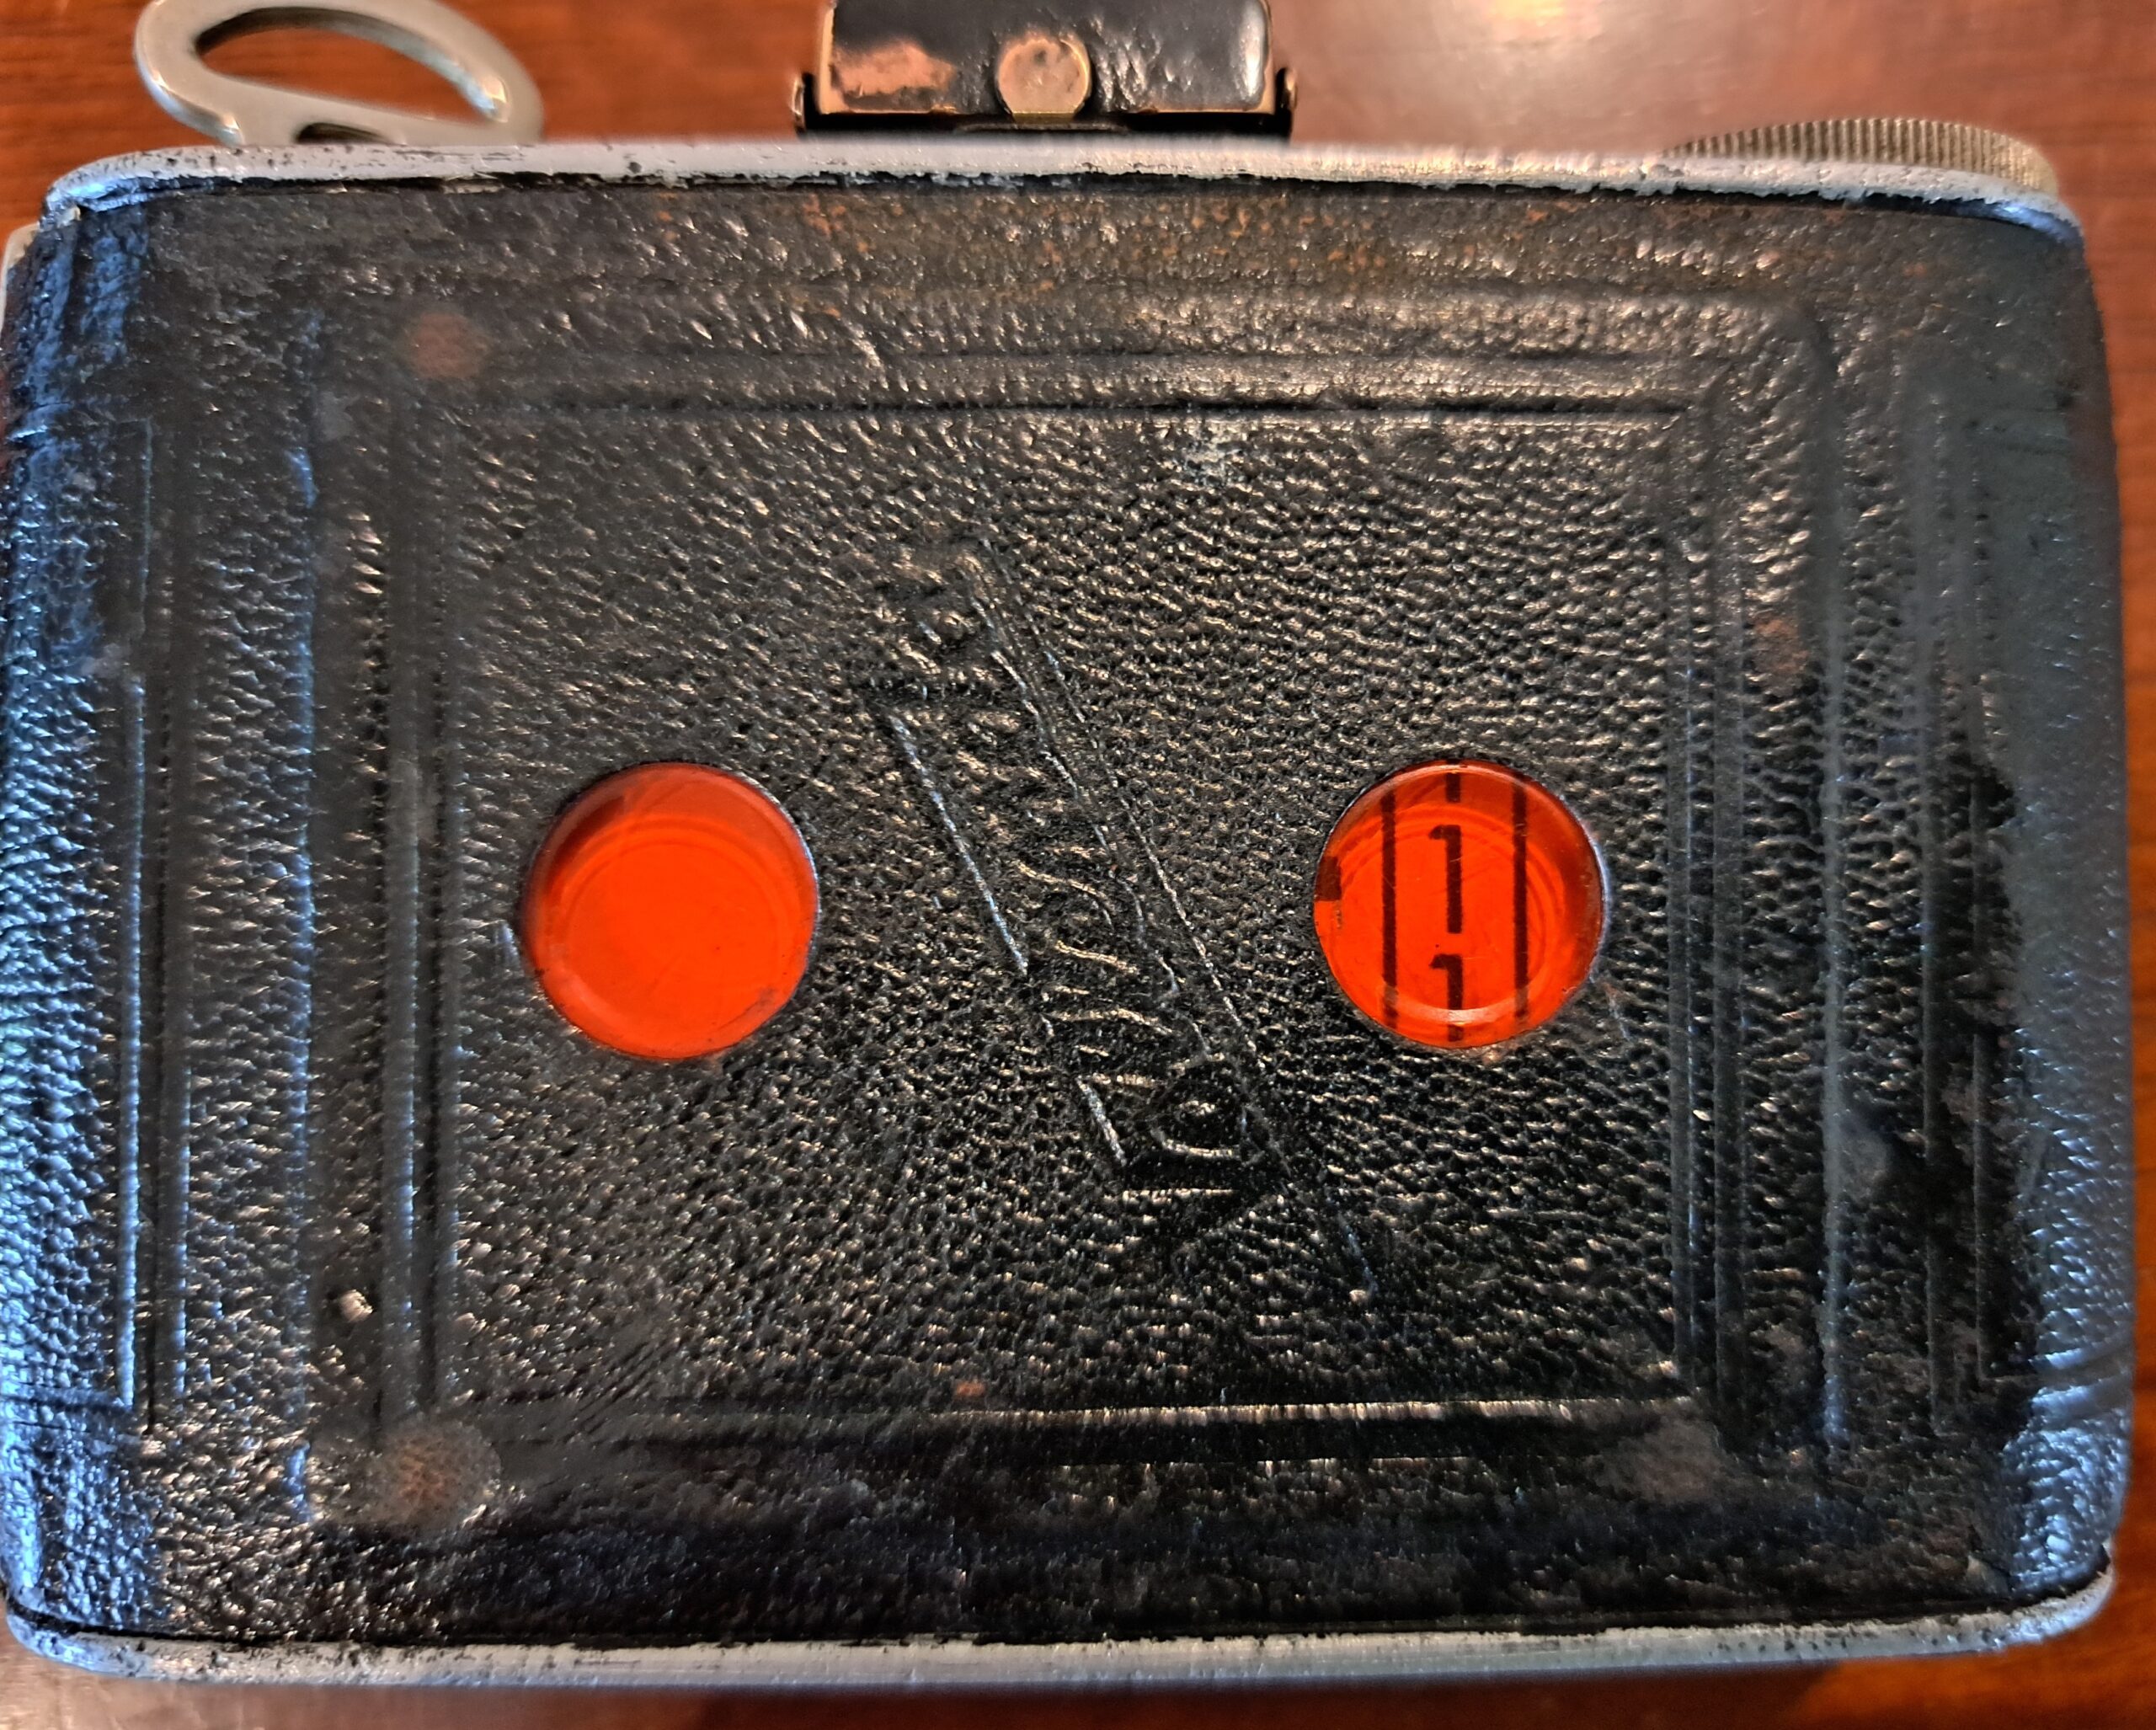 Back of a vintage camera showing the two red windows where the film numbers can be seen. The number one is in the right hand window.